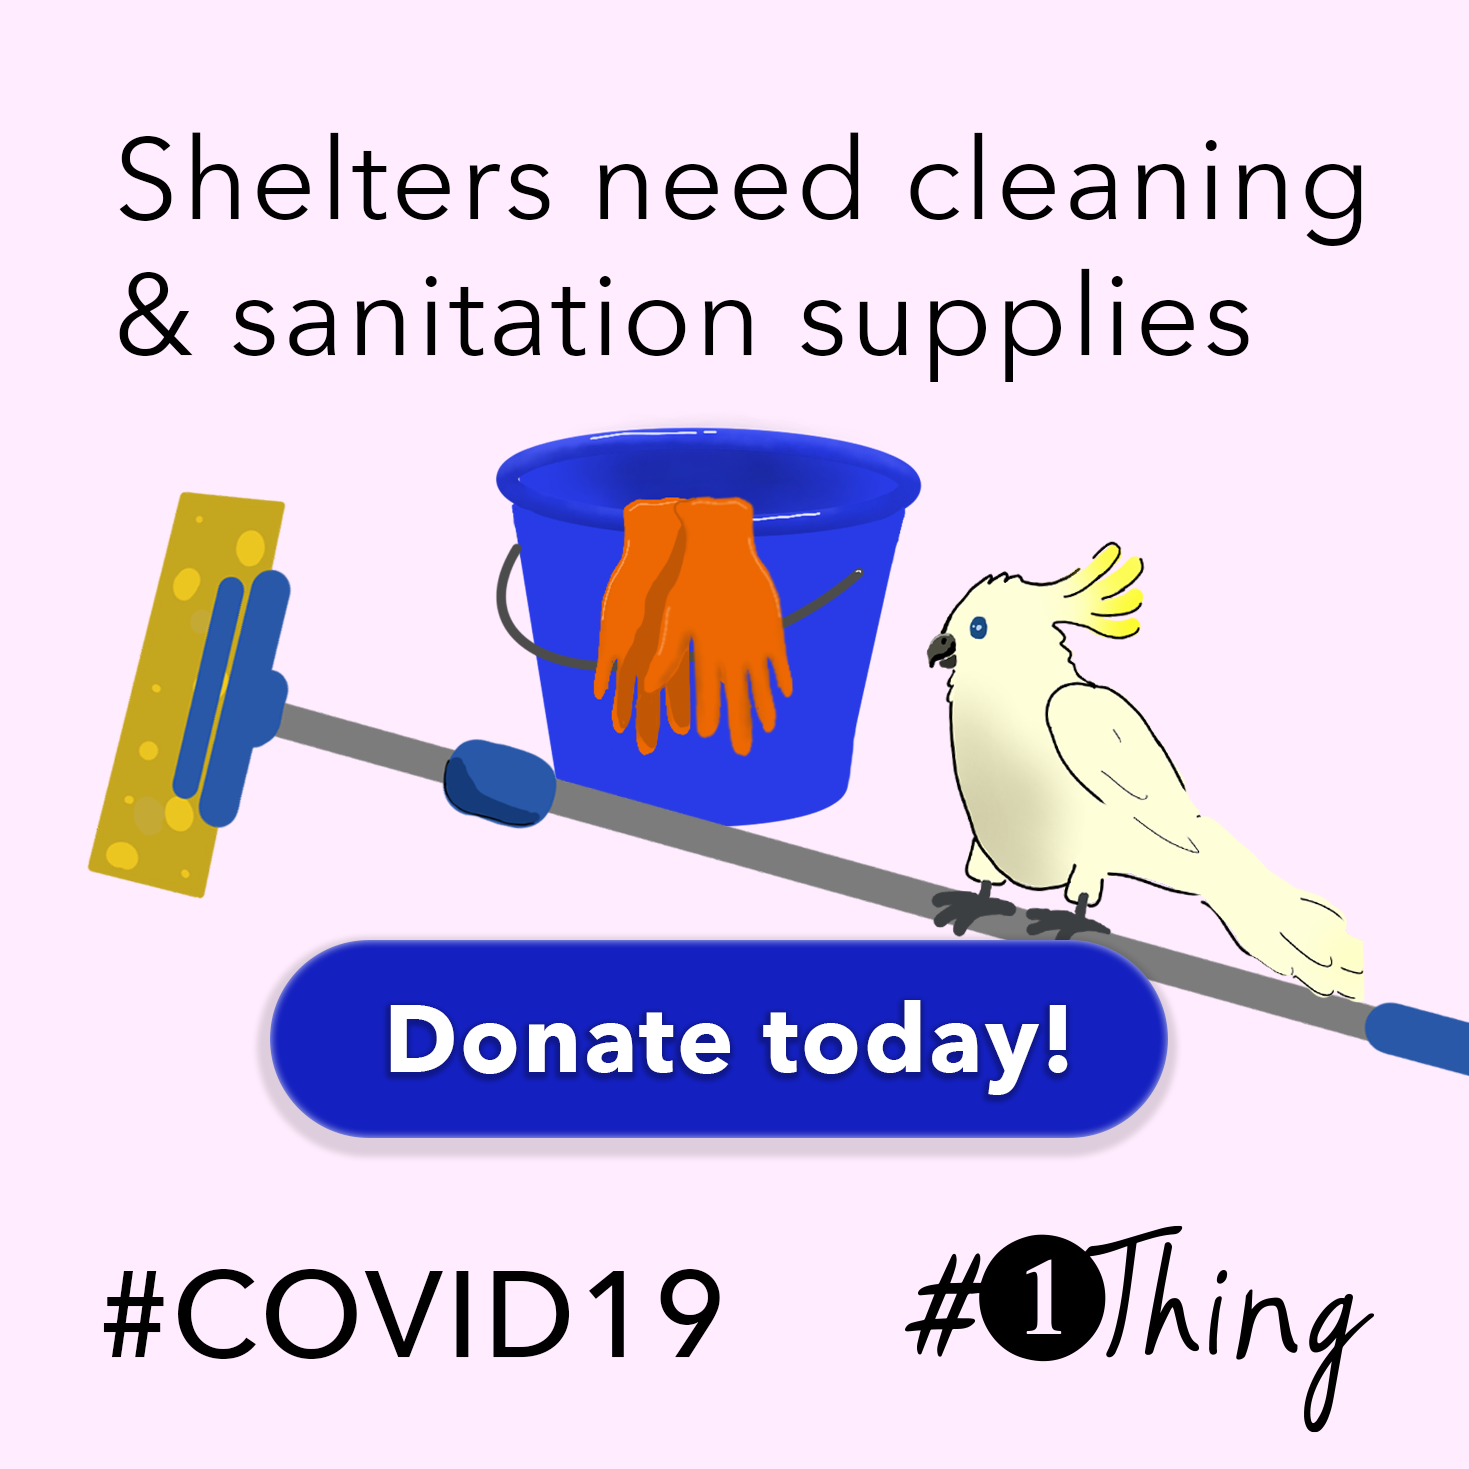 Shelters need cleaning & sanitation supplies